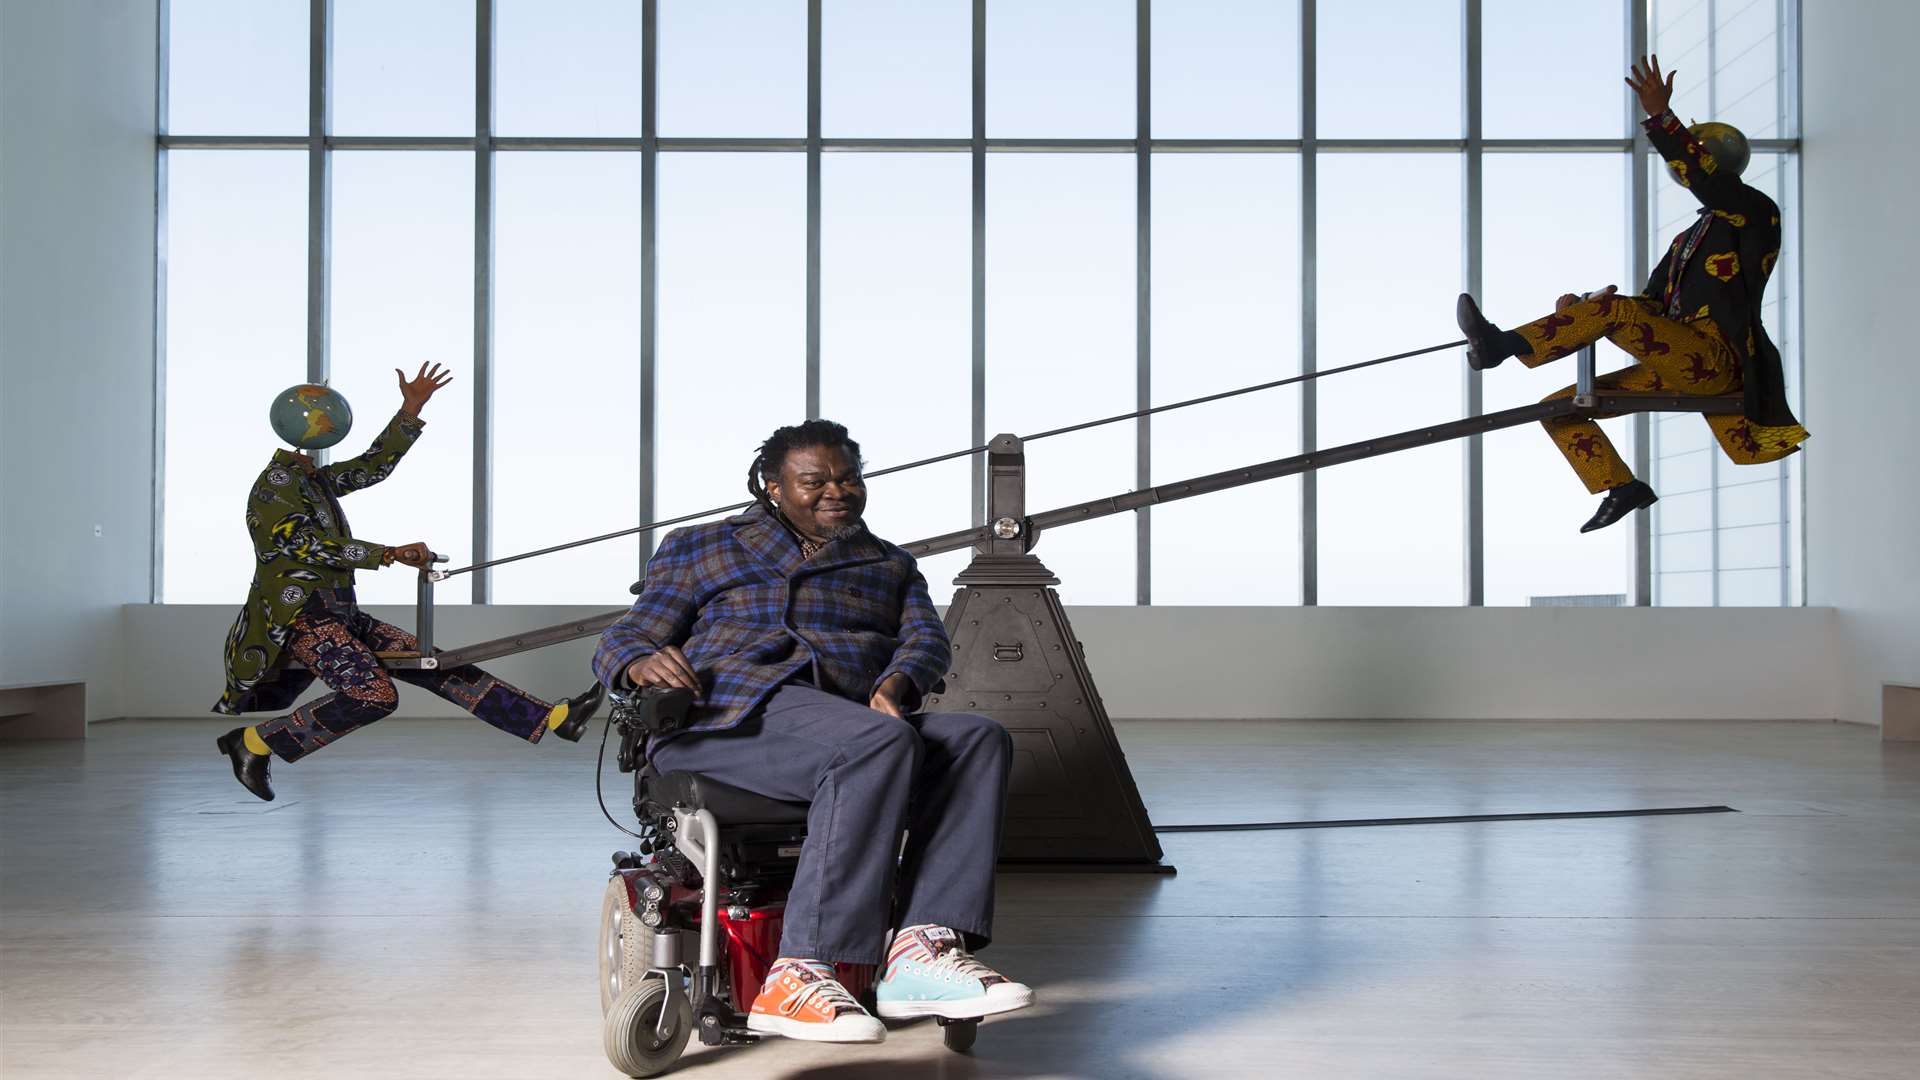 Yinka Shonibare's new work End of Empire is currently on display at the Turner